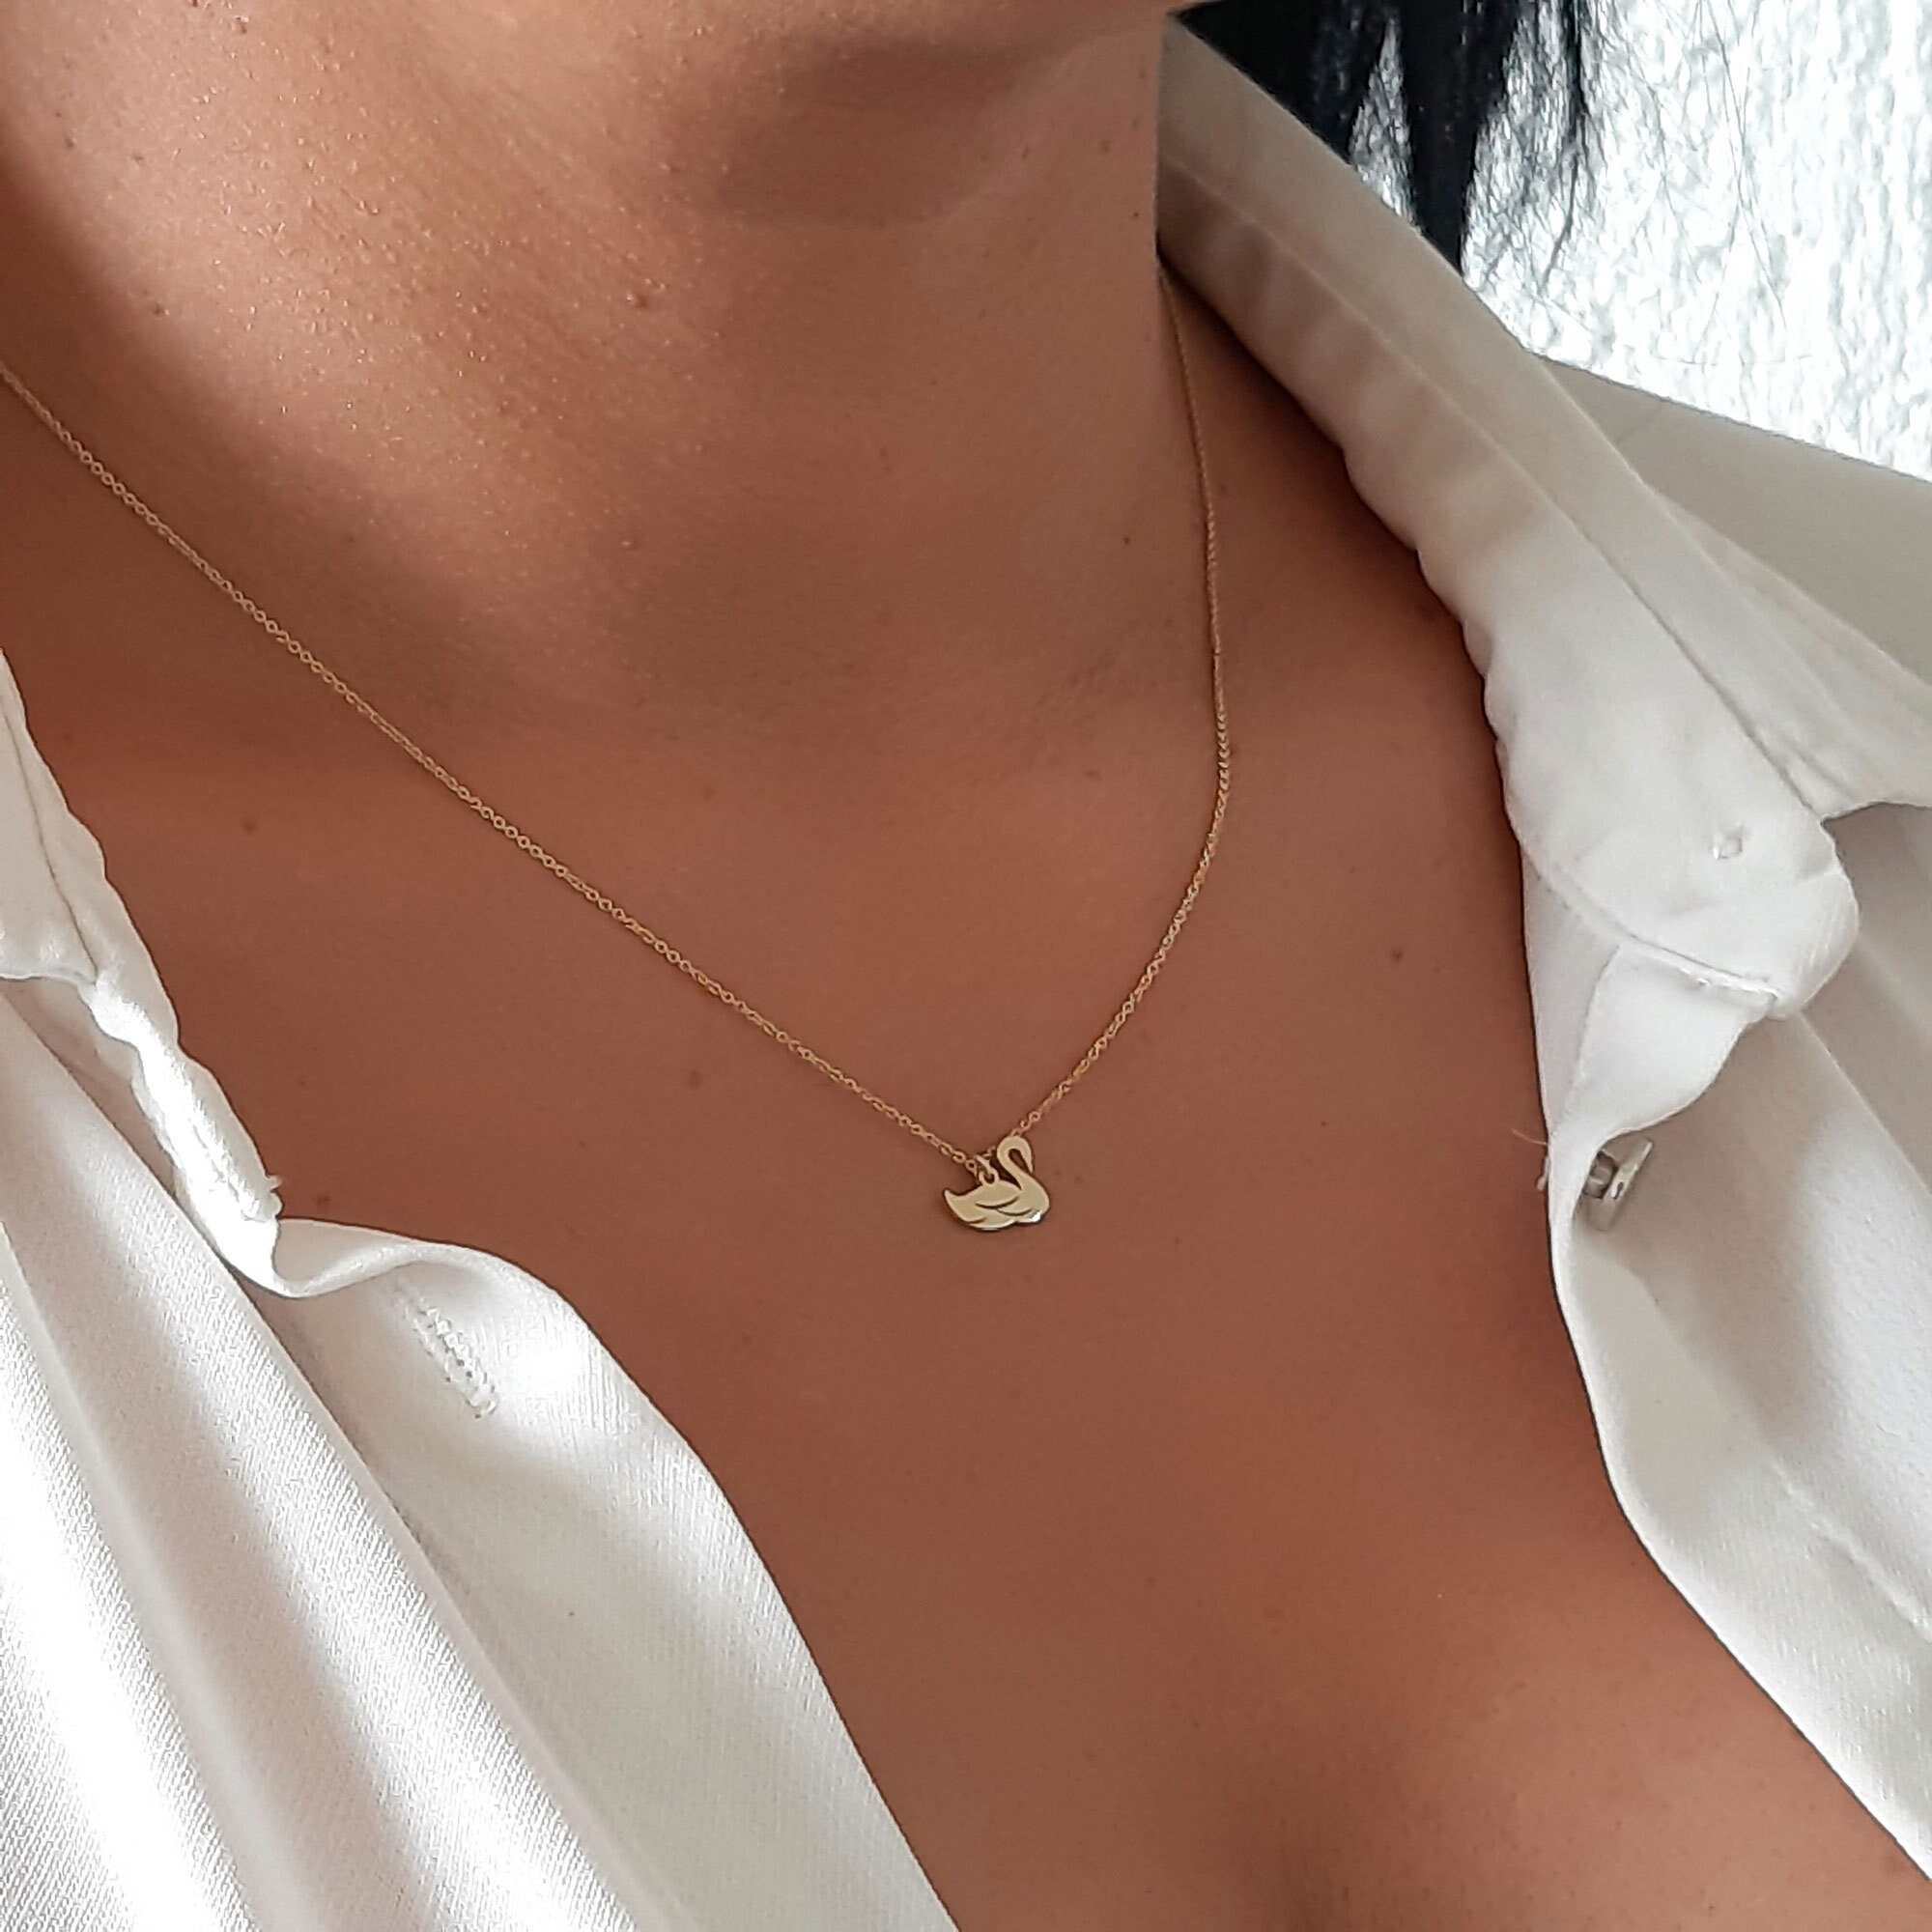 14K Gold Swan Necklace, Swan Necklace, Bird Necklace, Pair of Swans Pendant,  Swan Charm 14K Gold, Zirconia Swan Necklace, Jewelry Gift Gold - Etsy